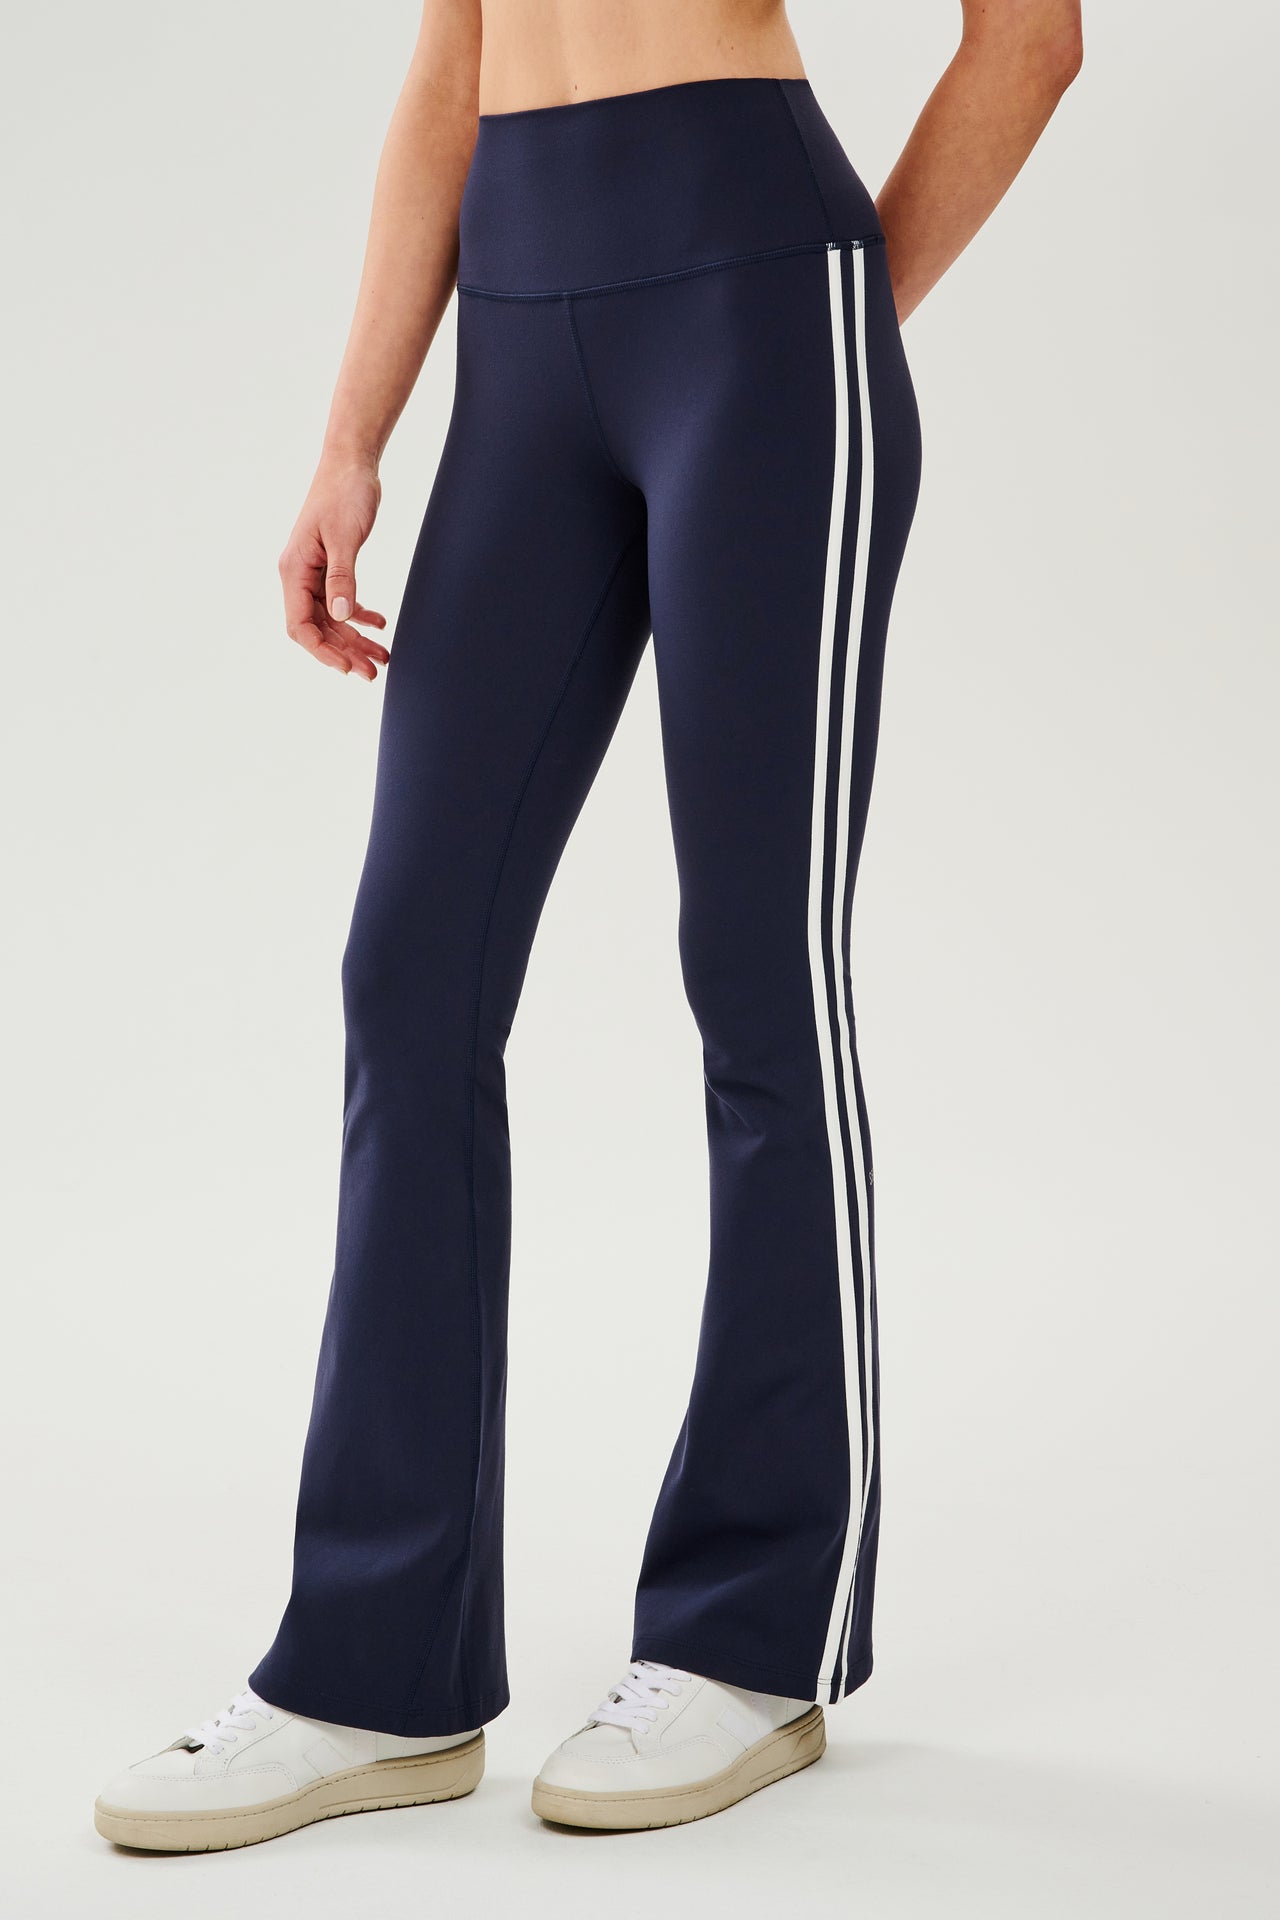 Front view of woman wearing dark blue high waist below ankle length legging with wide flared bottoms and white double side stripes on both legs. Paired with white shoes. 